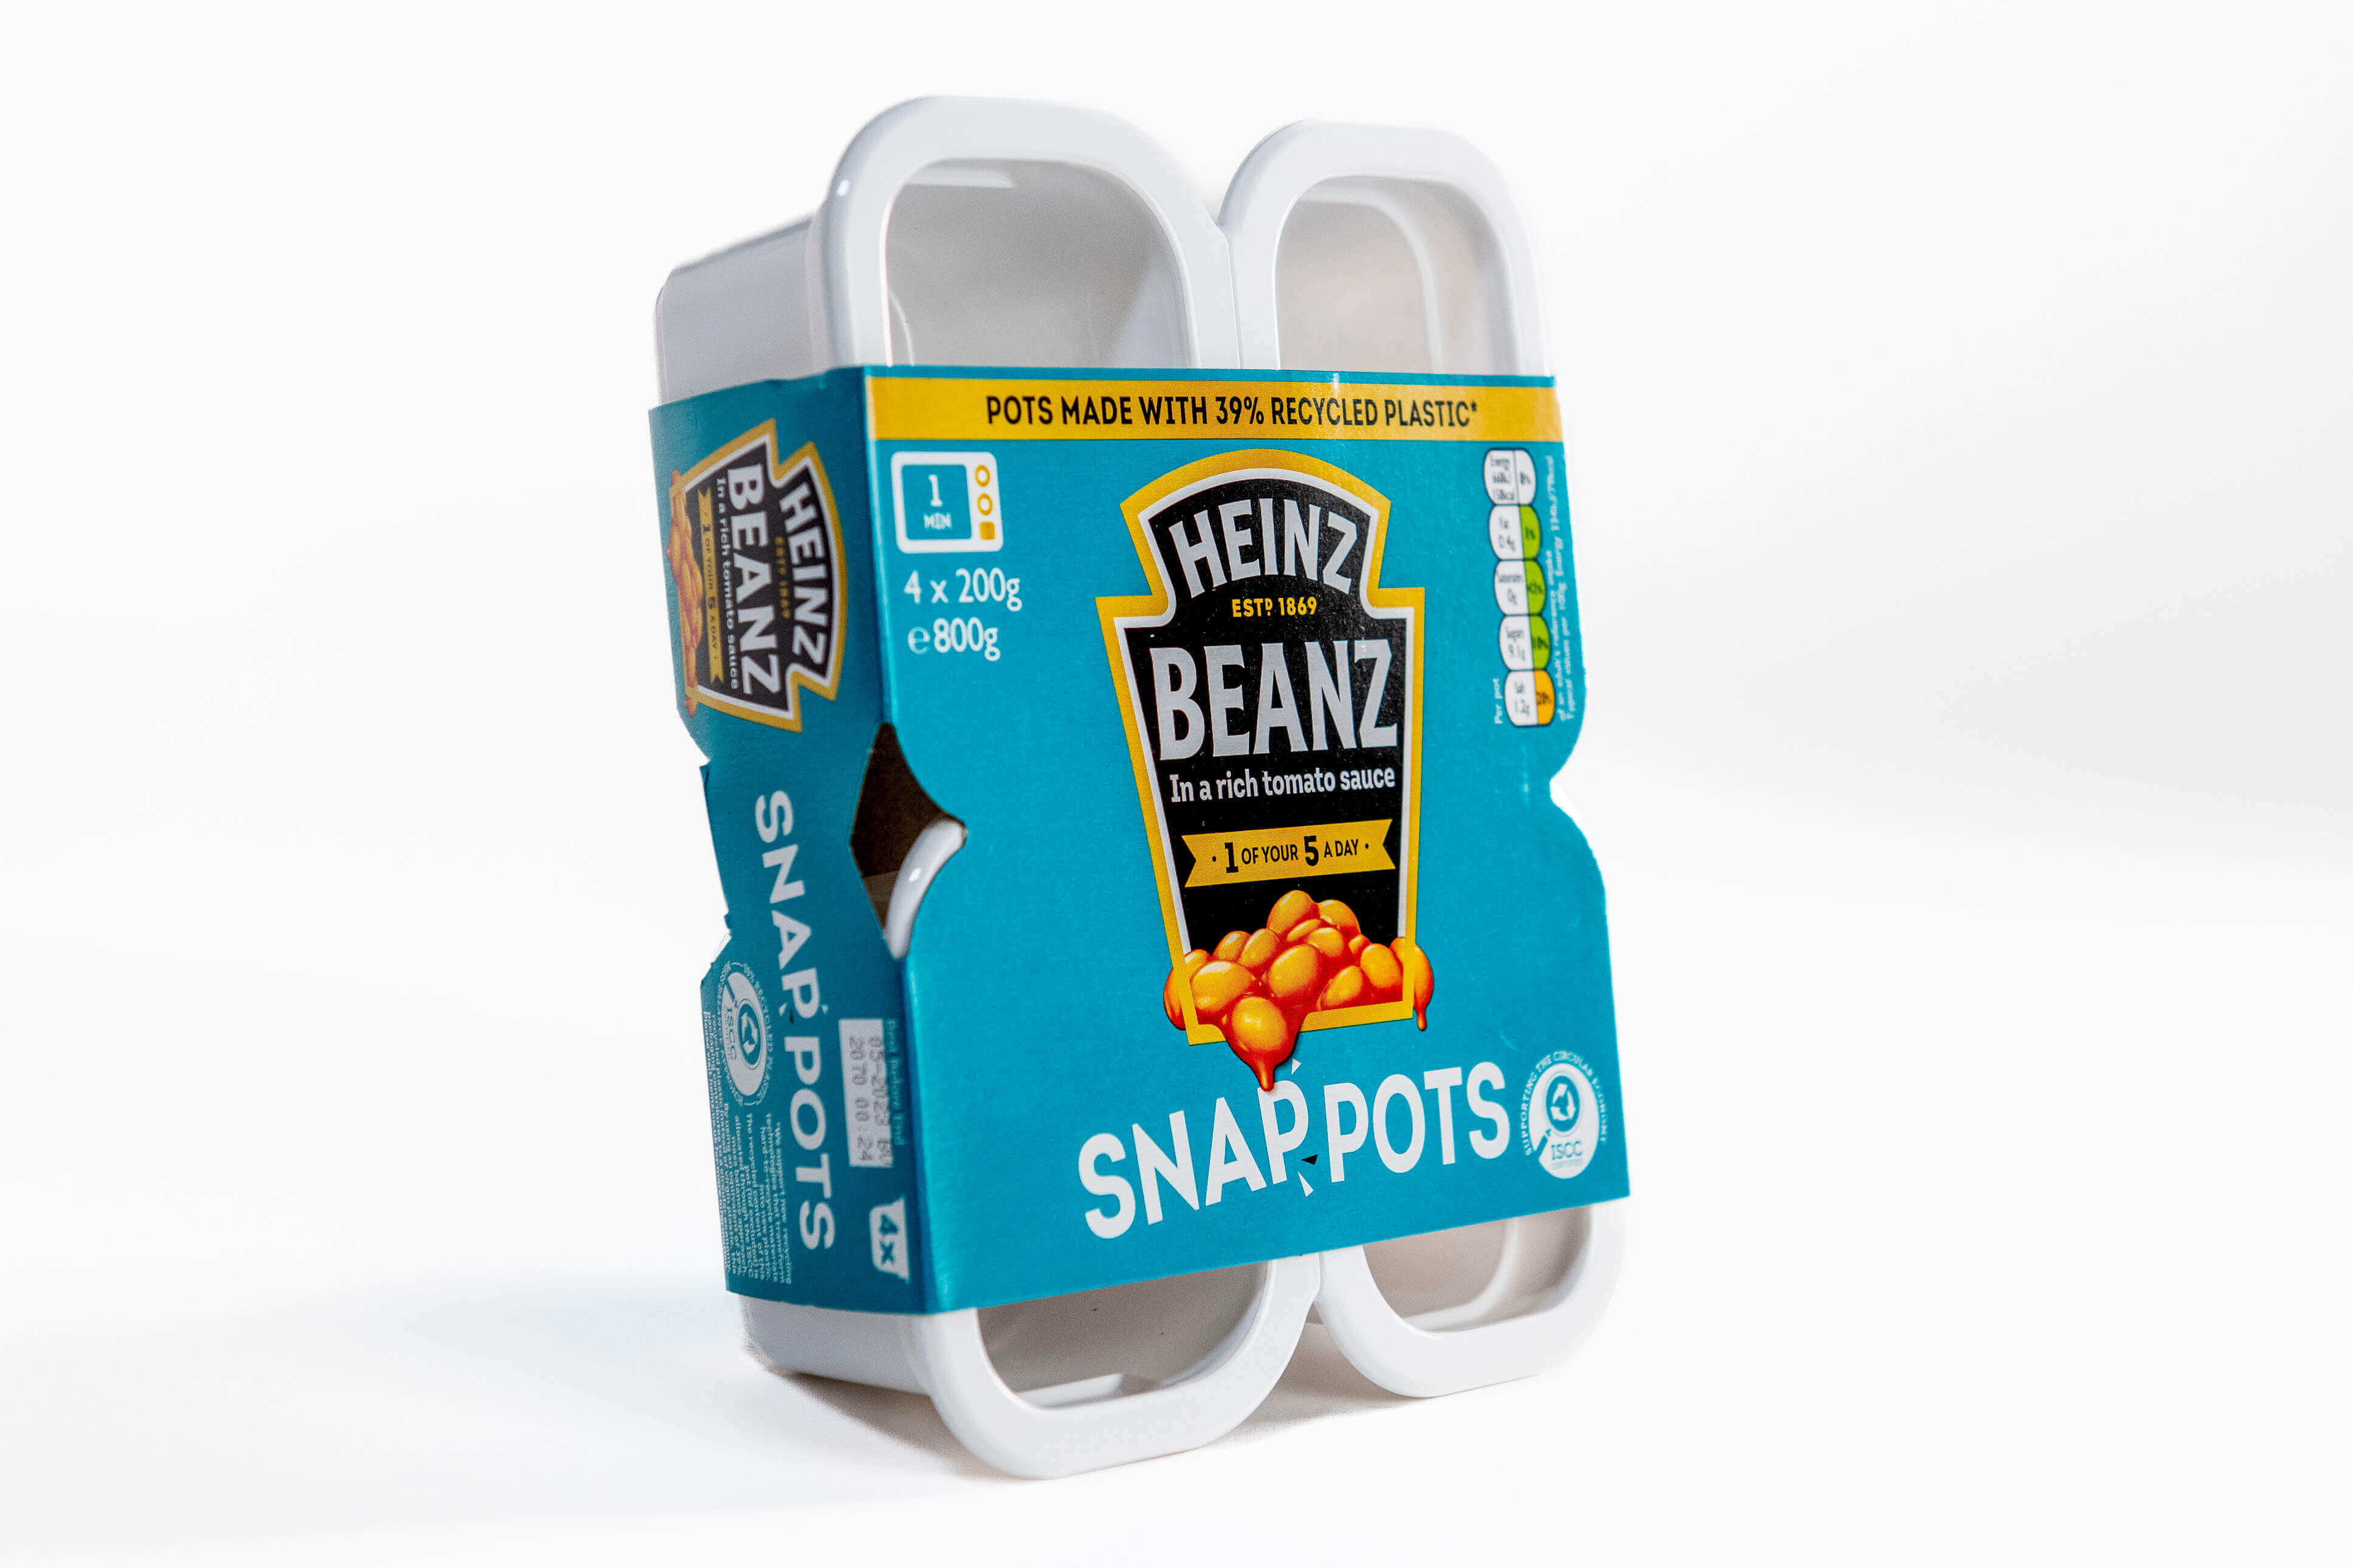 Recyclable Heinz Beanz Snap Pots made with Recycled Plastics